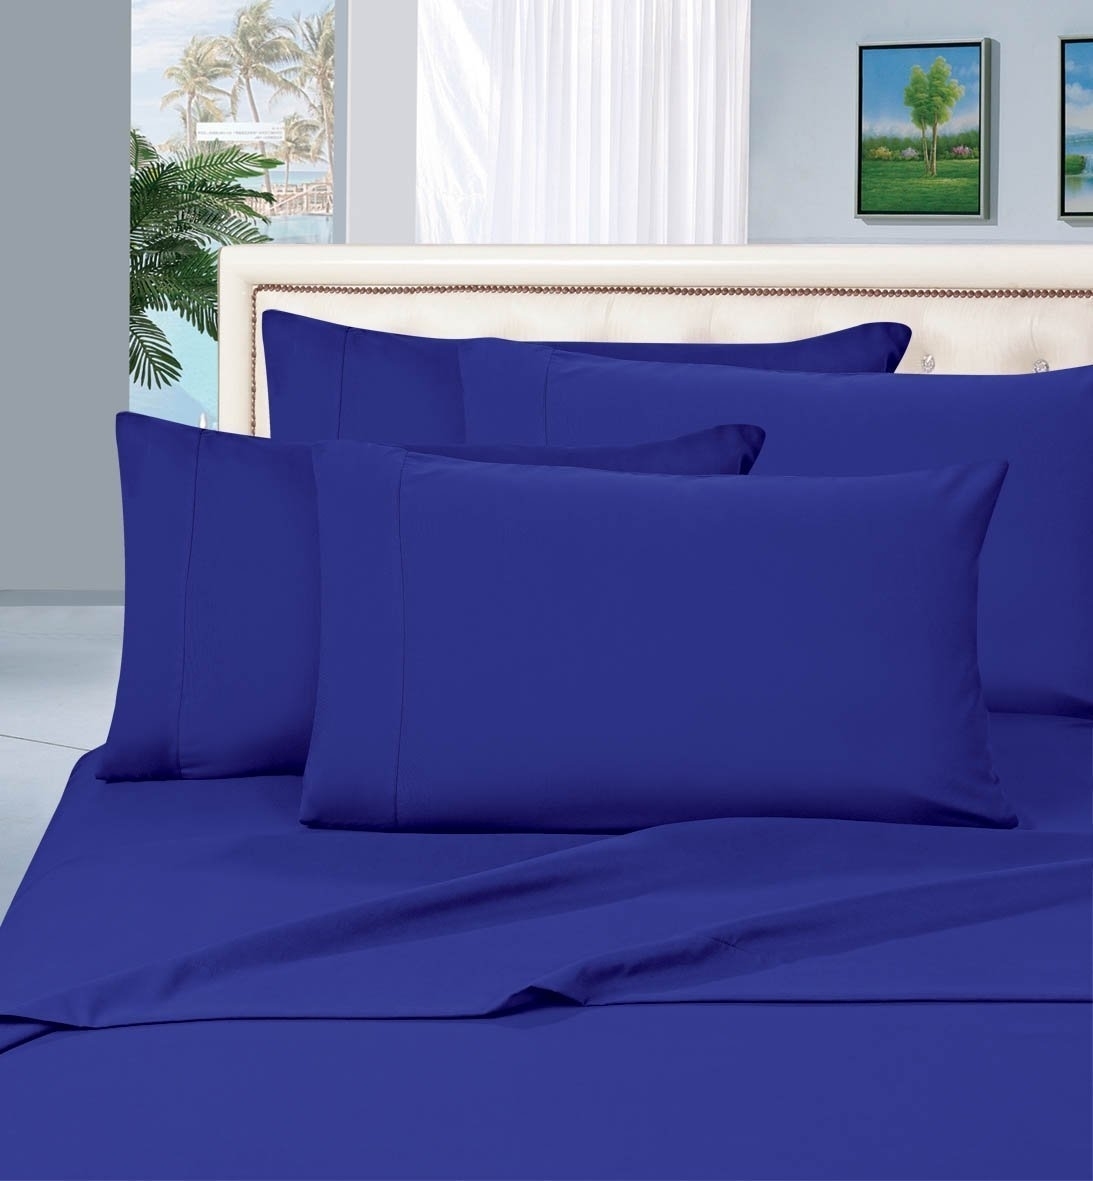 Elegant Comfort 1500 Series Wrinkle Resistant Egyptian Quality Hypoallergenic Ultra Soft Luxury 3-piece Bed Sheet Set, Twin, Royal Blue